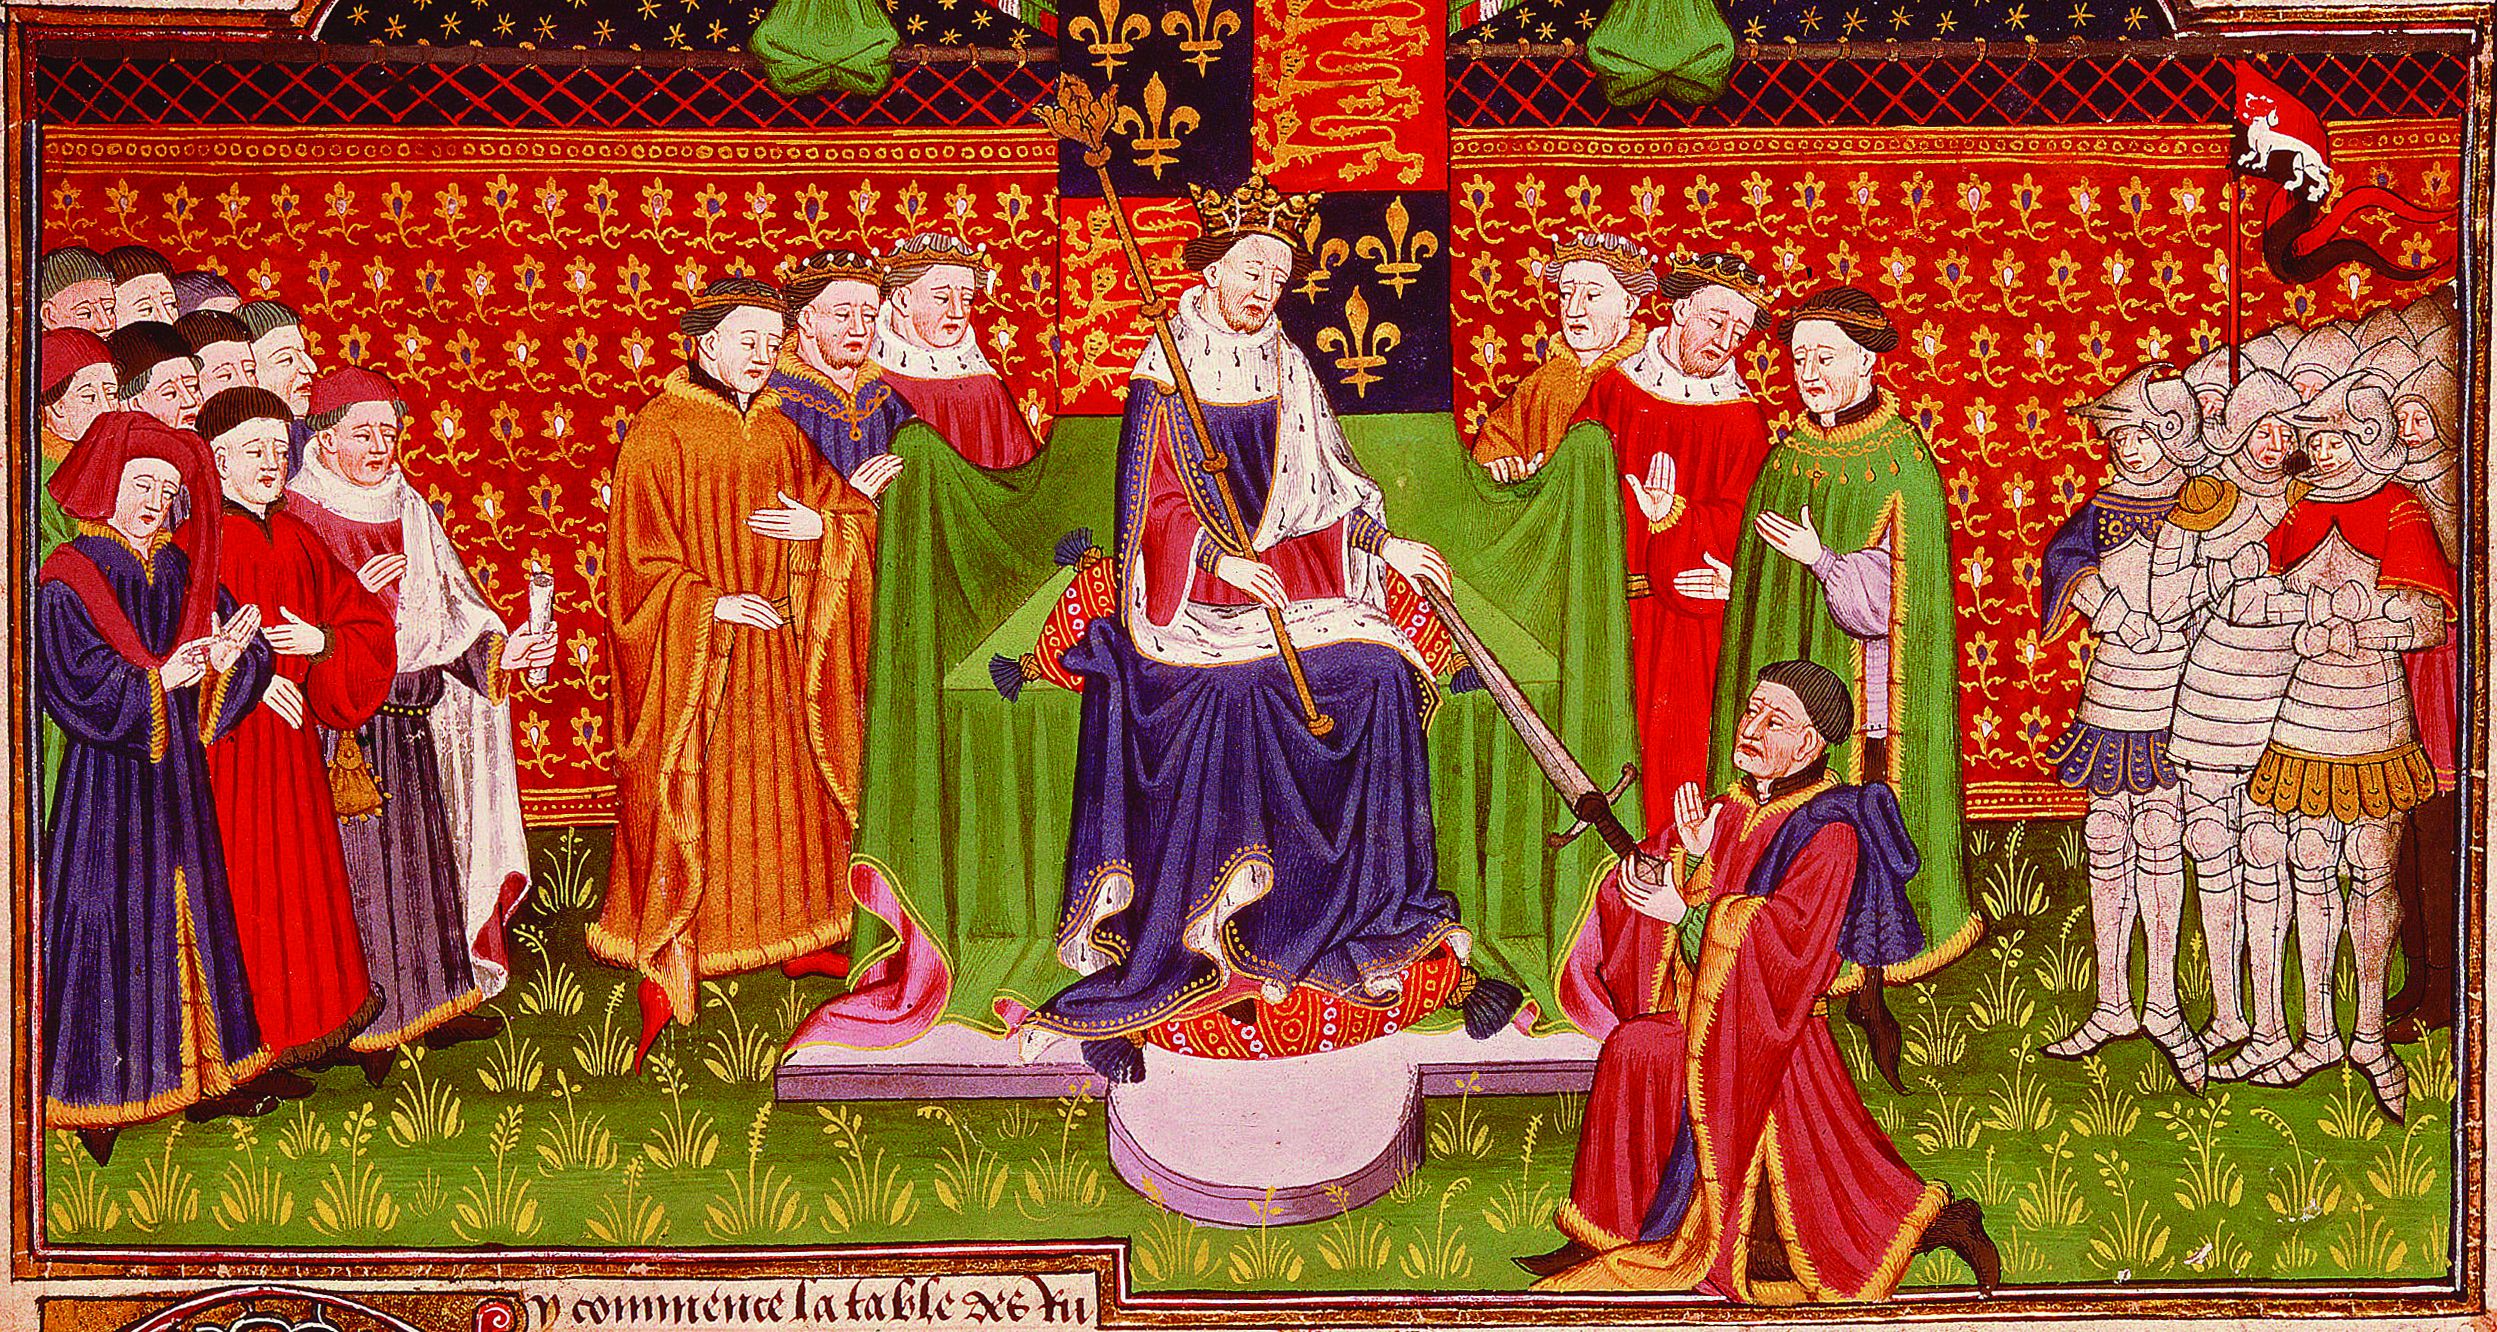 In happier days, King Henry VI invests John Talbot with the sword of office as constable of France in 1436. From an illuminated manuscript of the era.